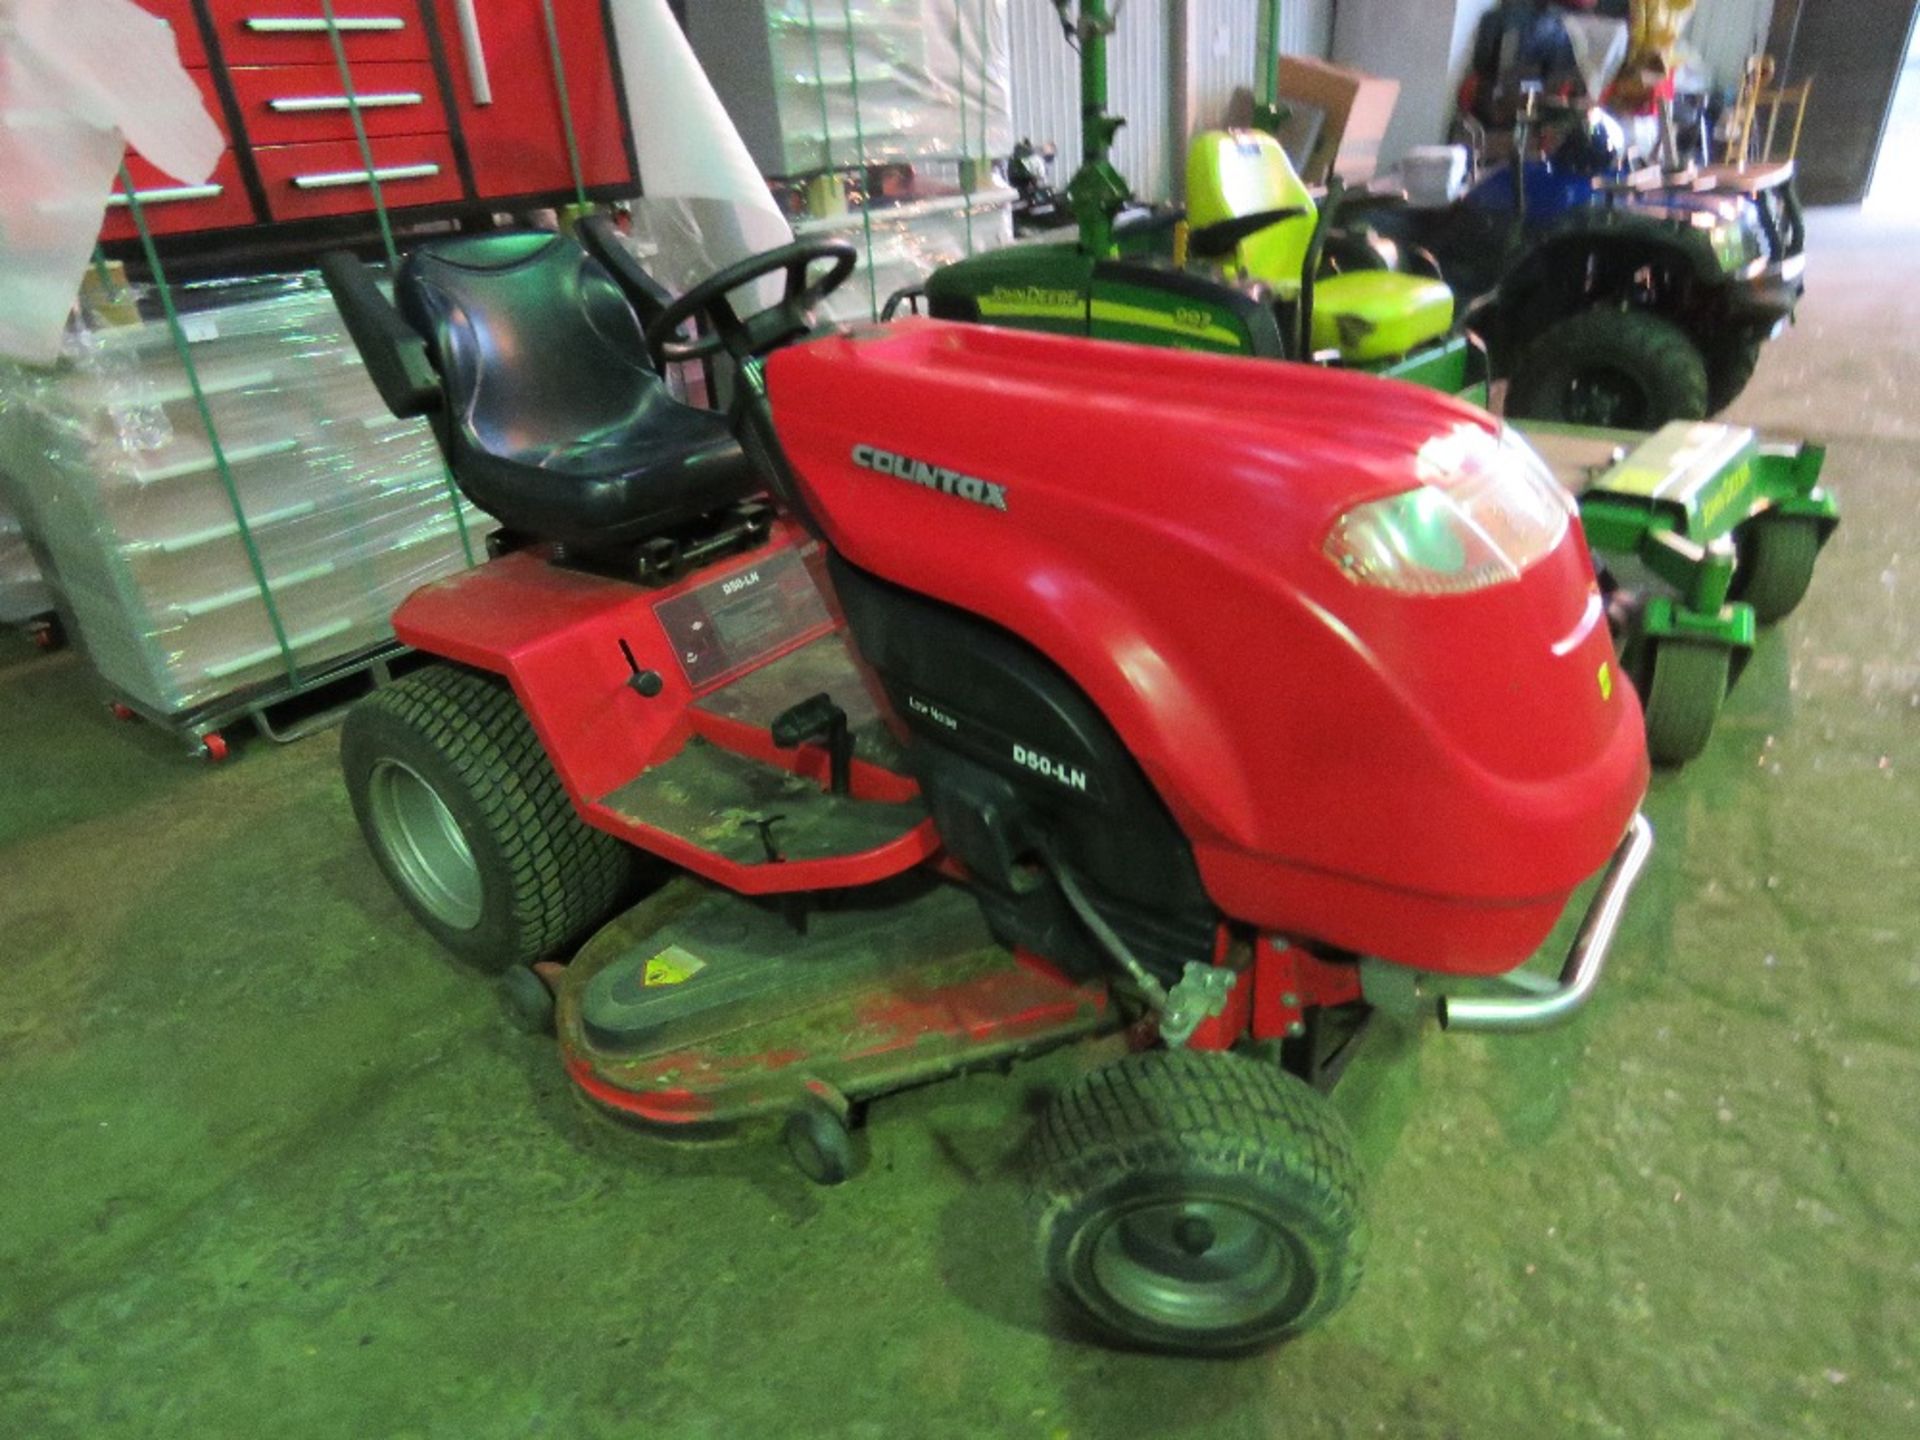 COUNTAX D50-LN DIESEL ENGINED RIDE ON MOWER, SOURCED FROM FOOTBALL CLUB HAVING PURCHASED A LARGER MA - Image 3 of 8